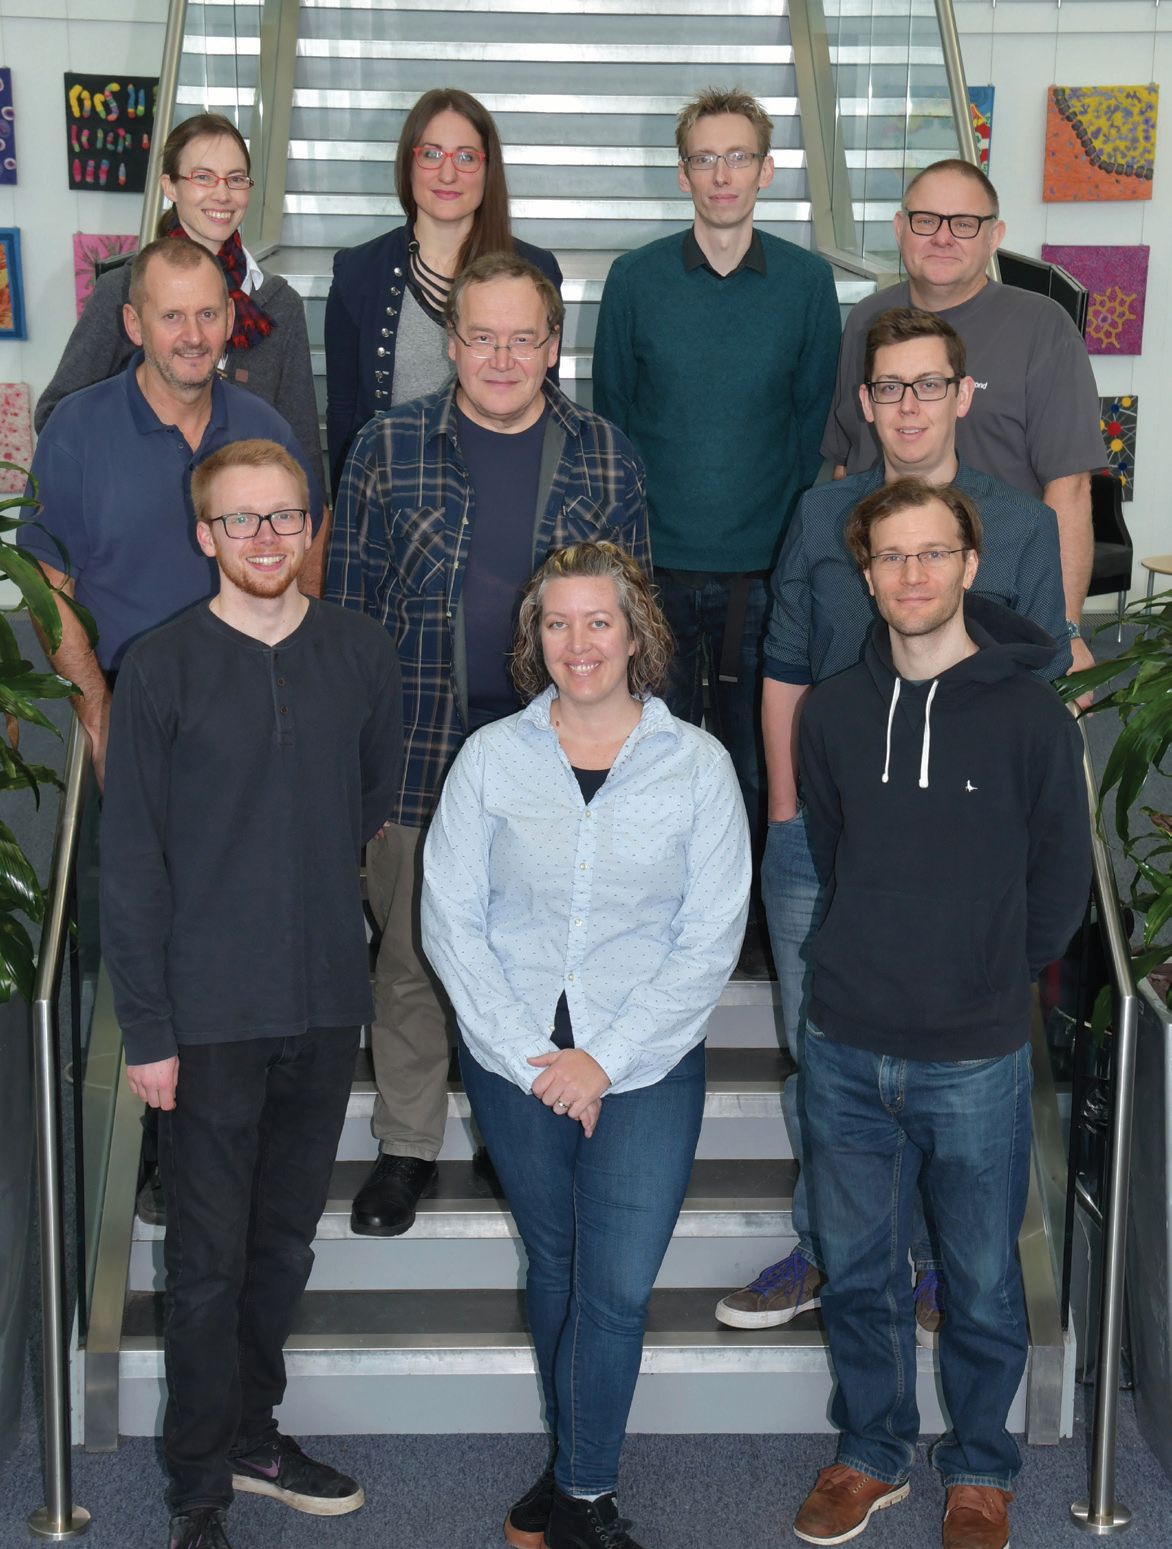 The I15 and I15-1 beamlines team and support group, clockwise from top left: Annette Kleppe, Maria Diaz Lopez, Philip Chater, Stuart Gurney, Dean Keeble, Dominik Daisenberger, Christine Beavers (PBS), Lawrence Gammond, Allan Ross, Volodymyr Khotkevych.